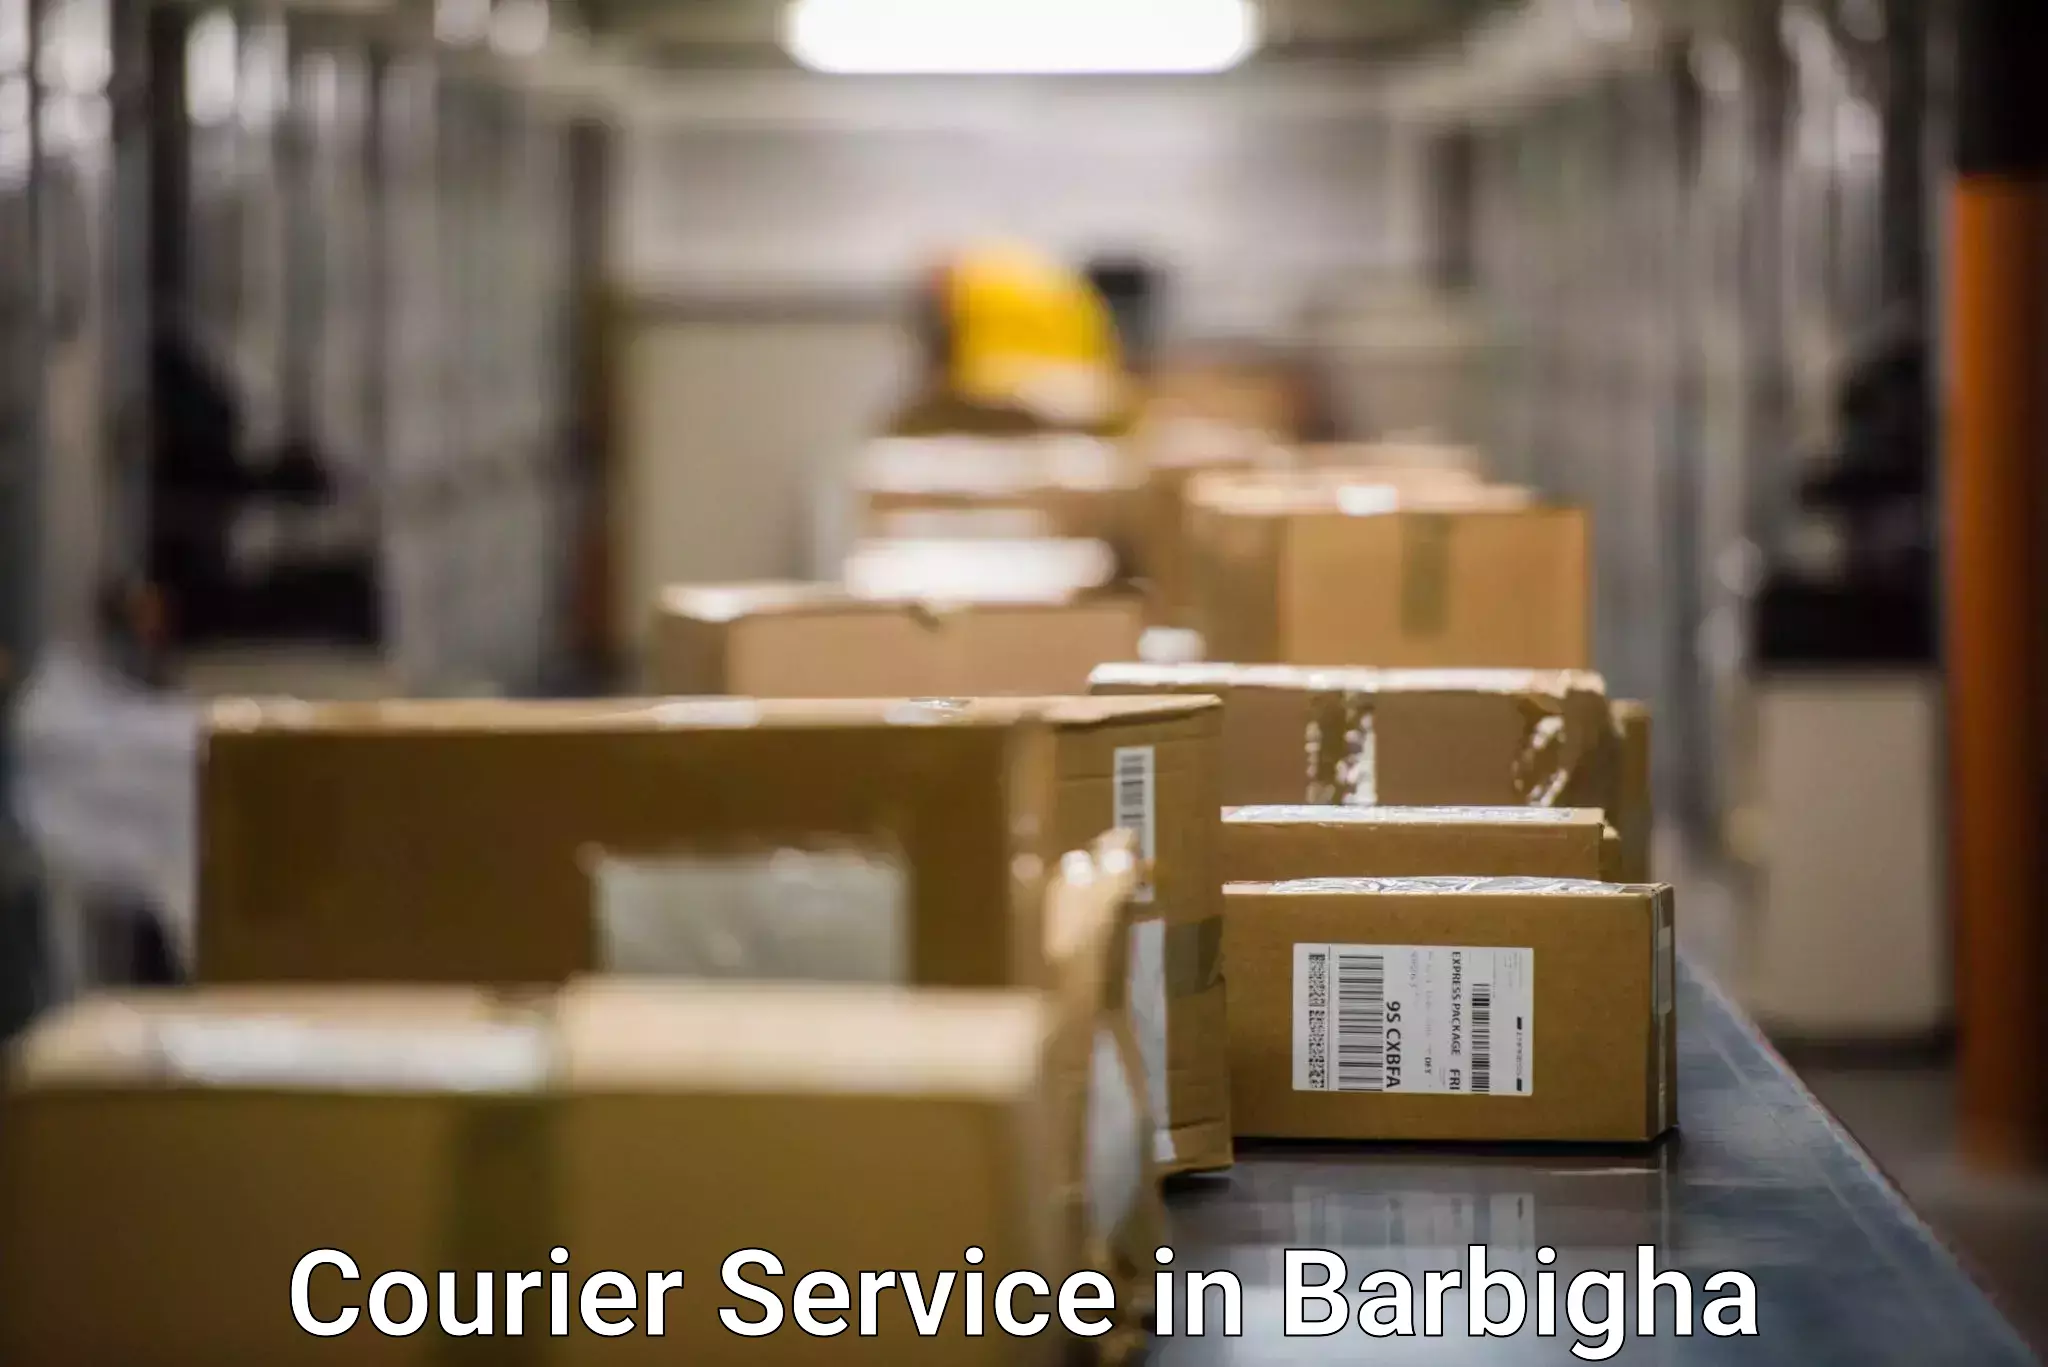 Customer-friendly courier services in Barbigha